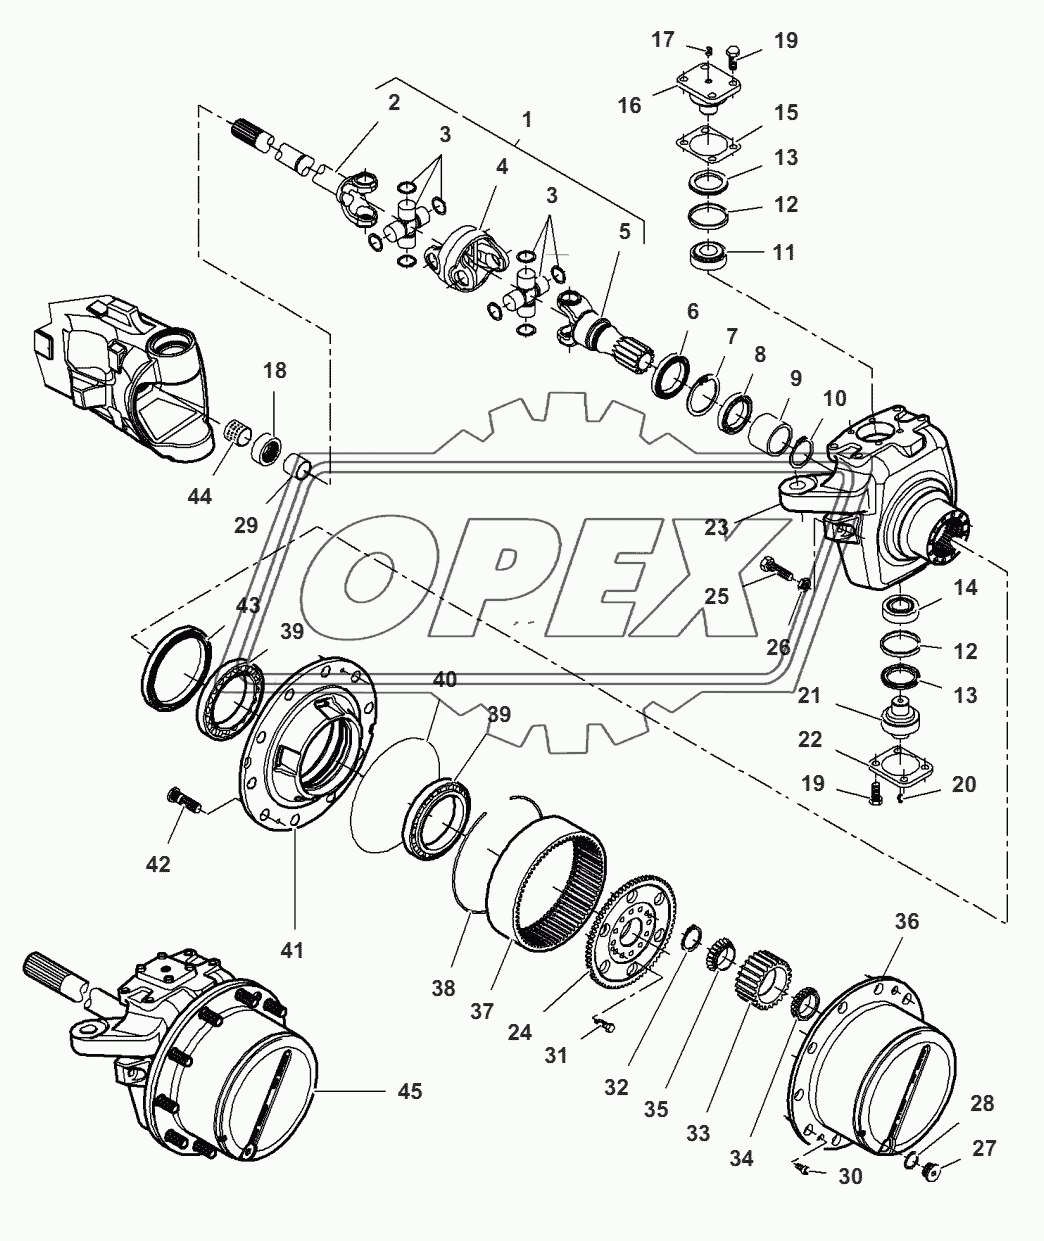 Front Axle 4- Wheel Drive - Final Drive - With Front Axle Fixed - With Front Axle Suspended